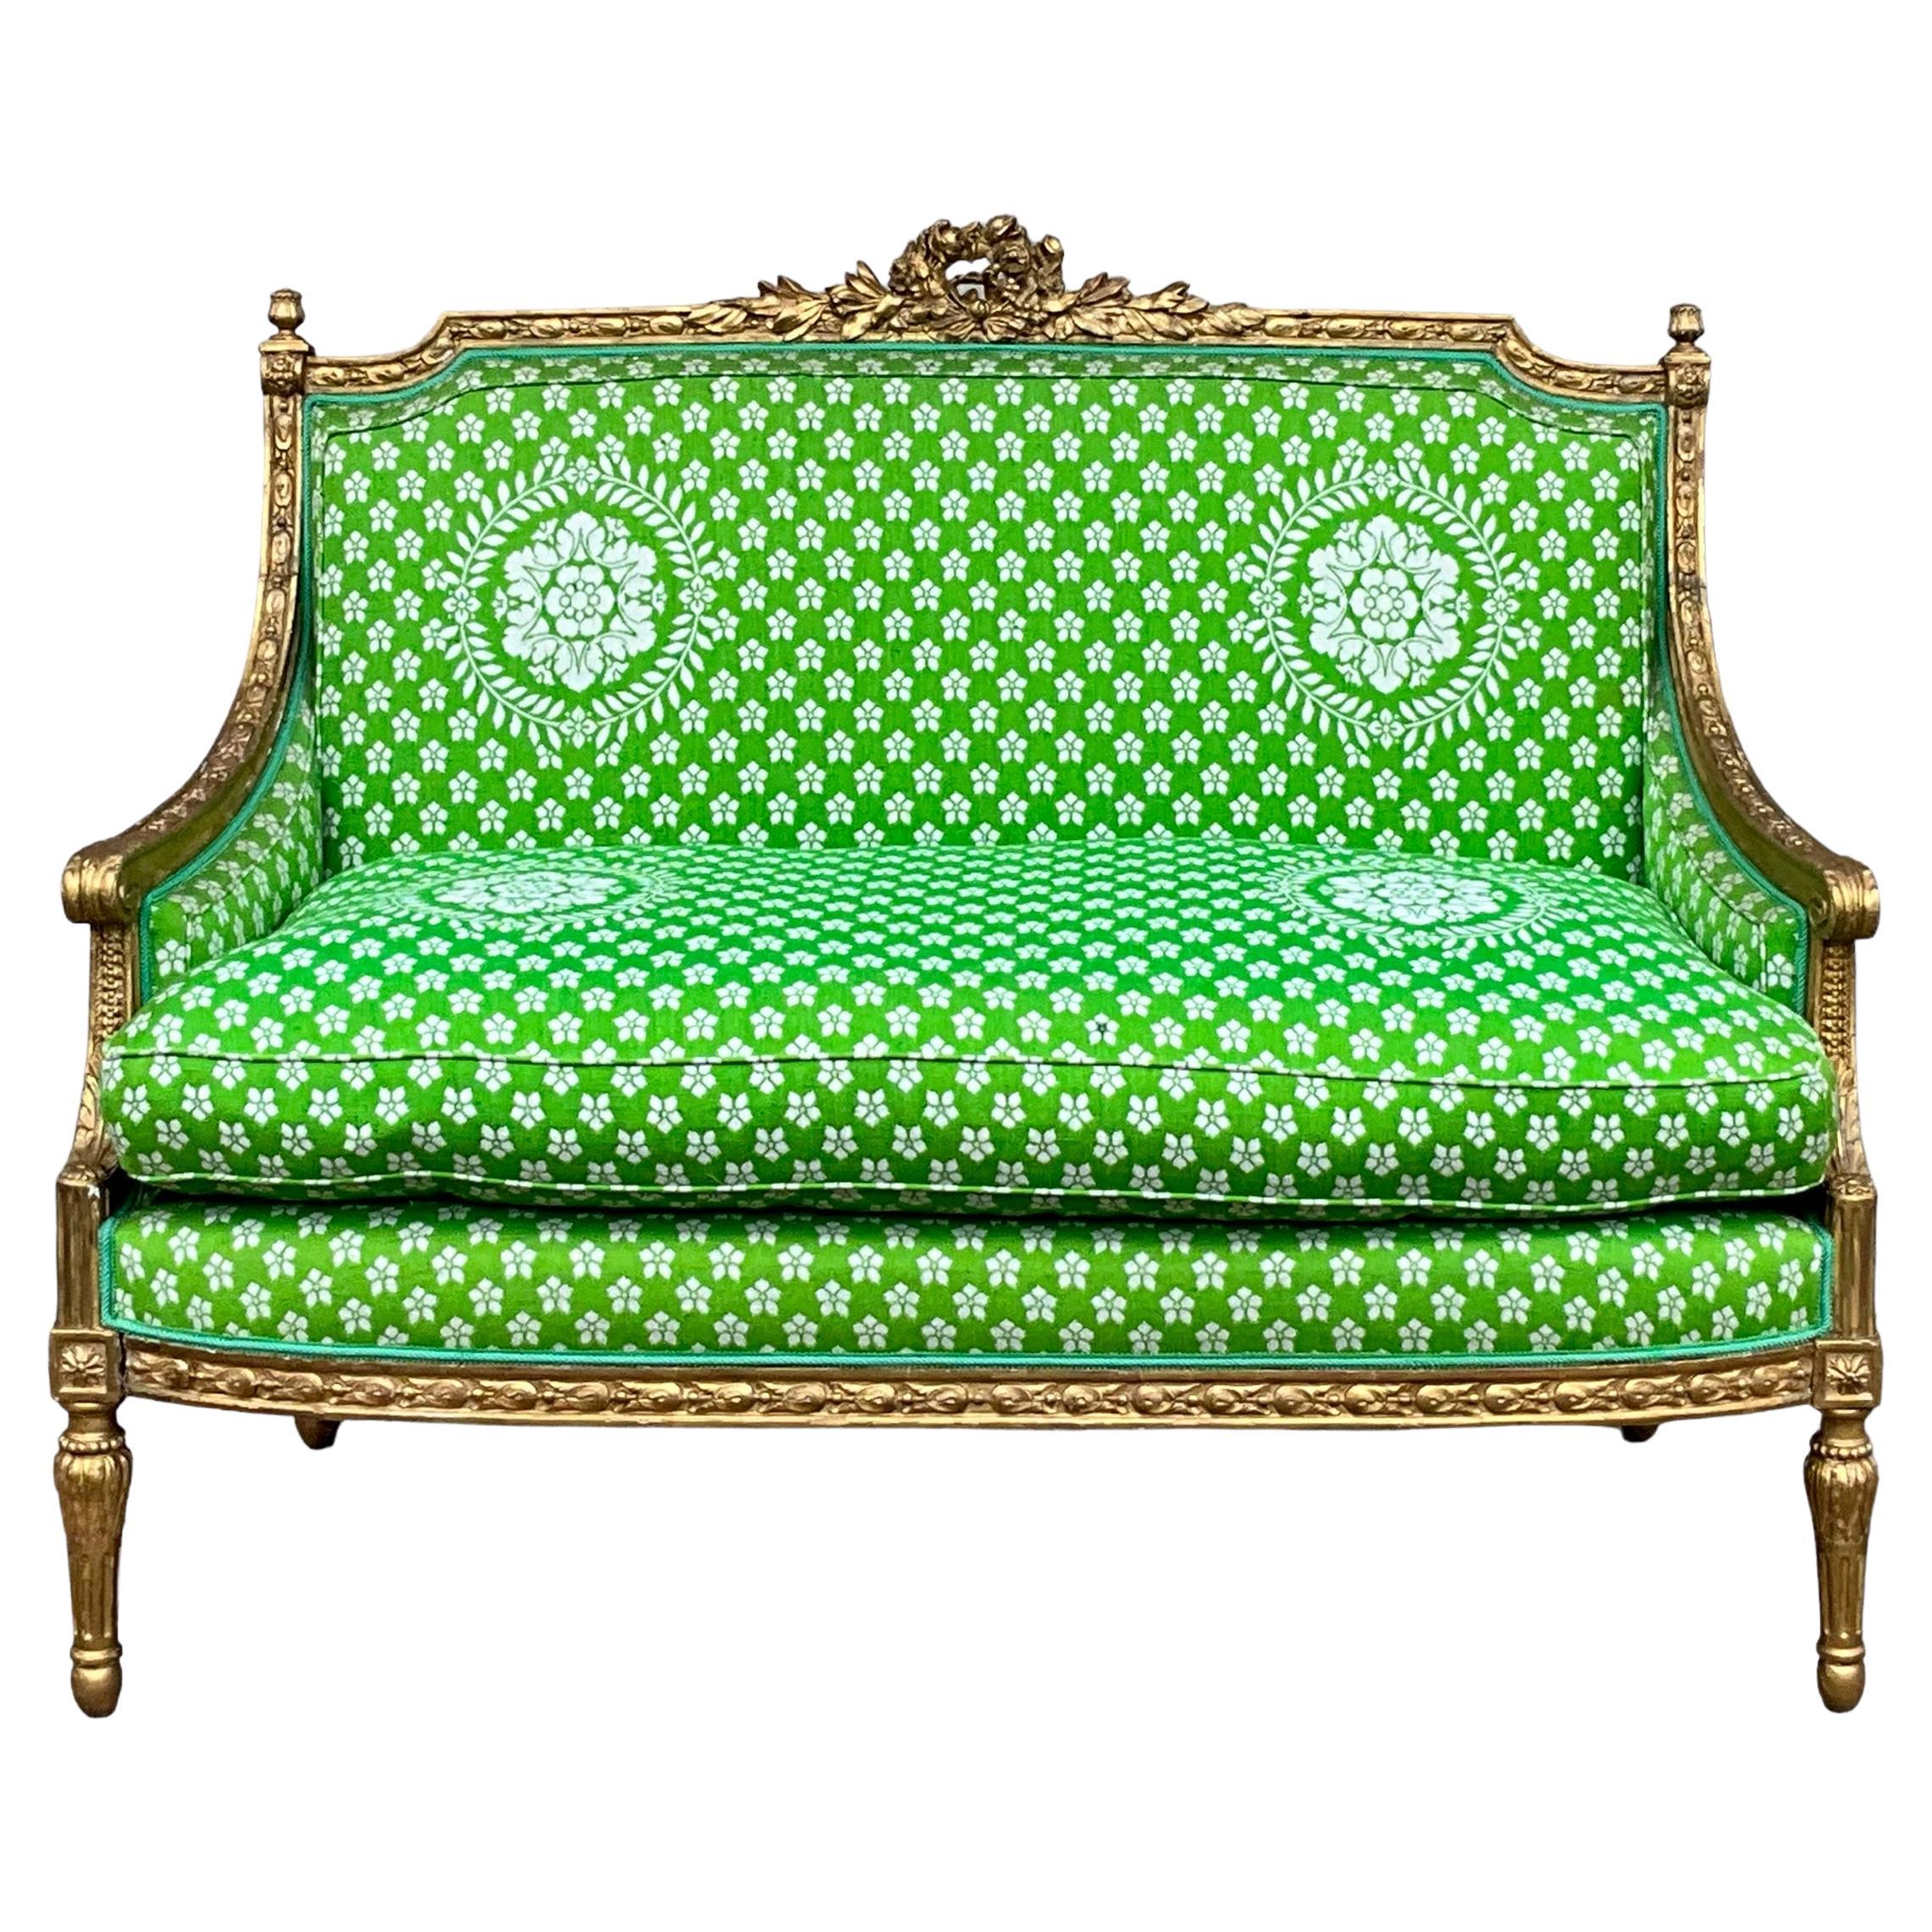 19th-C. French Louis XVI Style Carved Giltwood Settee With Down Cushion For Sale